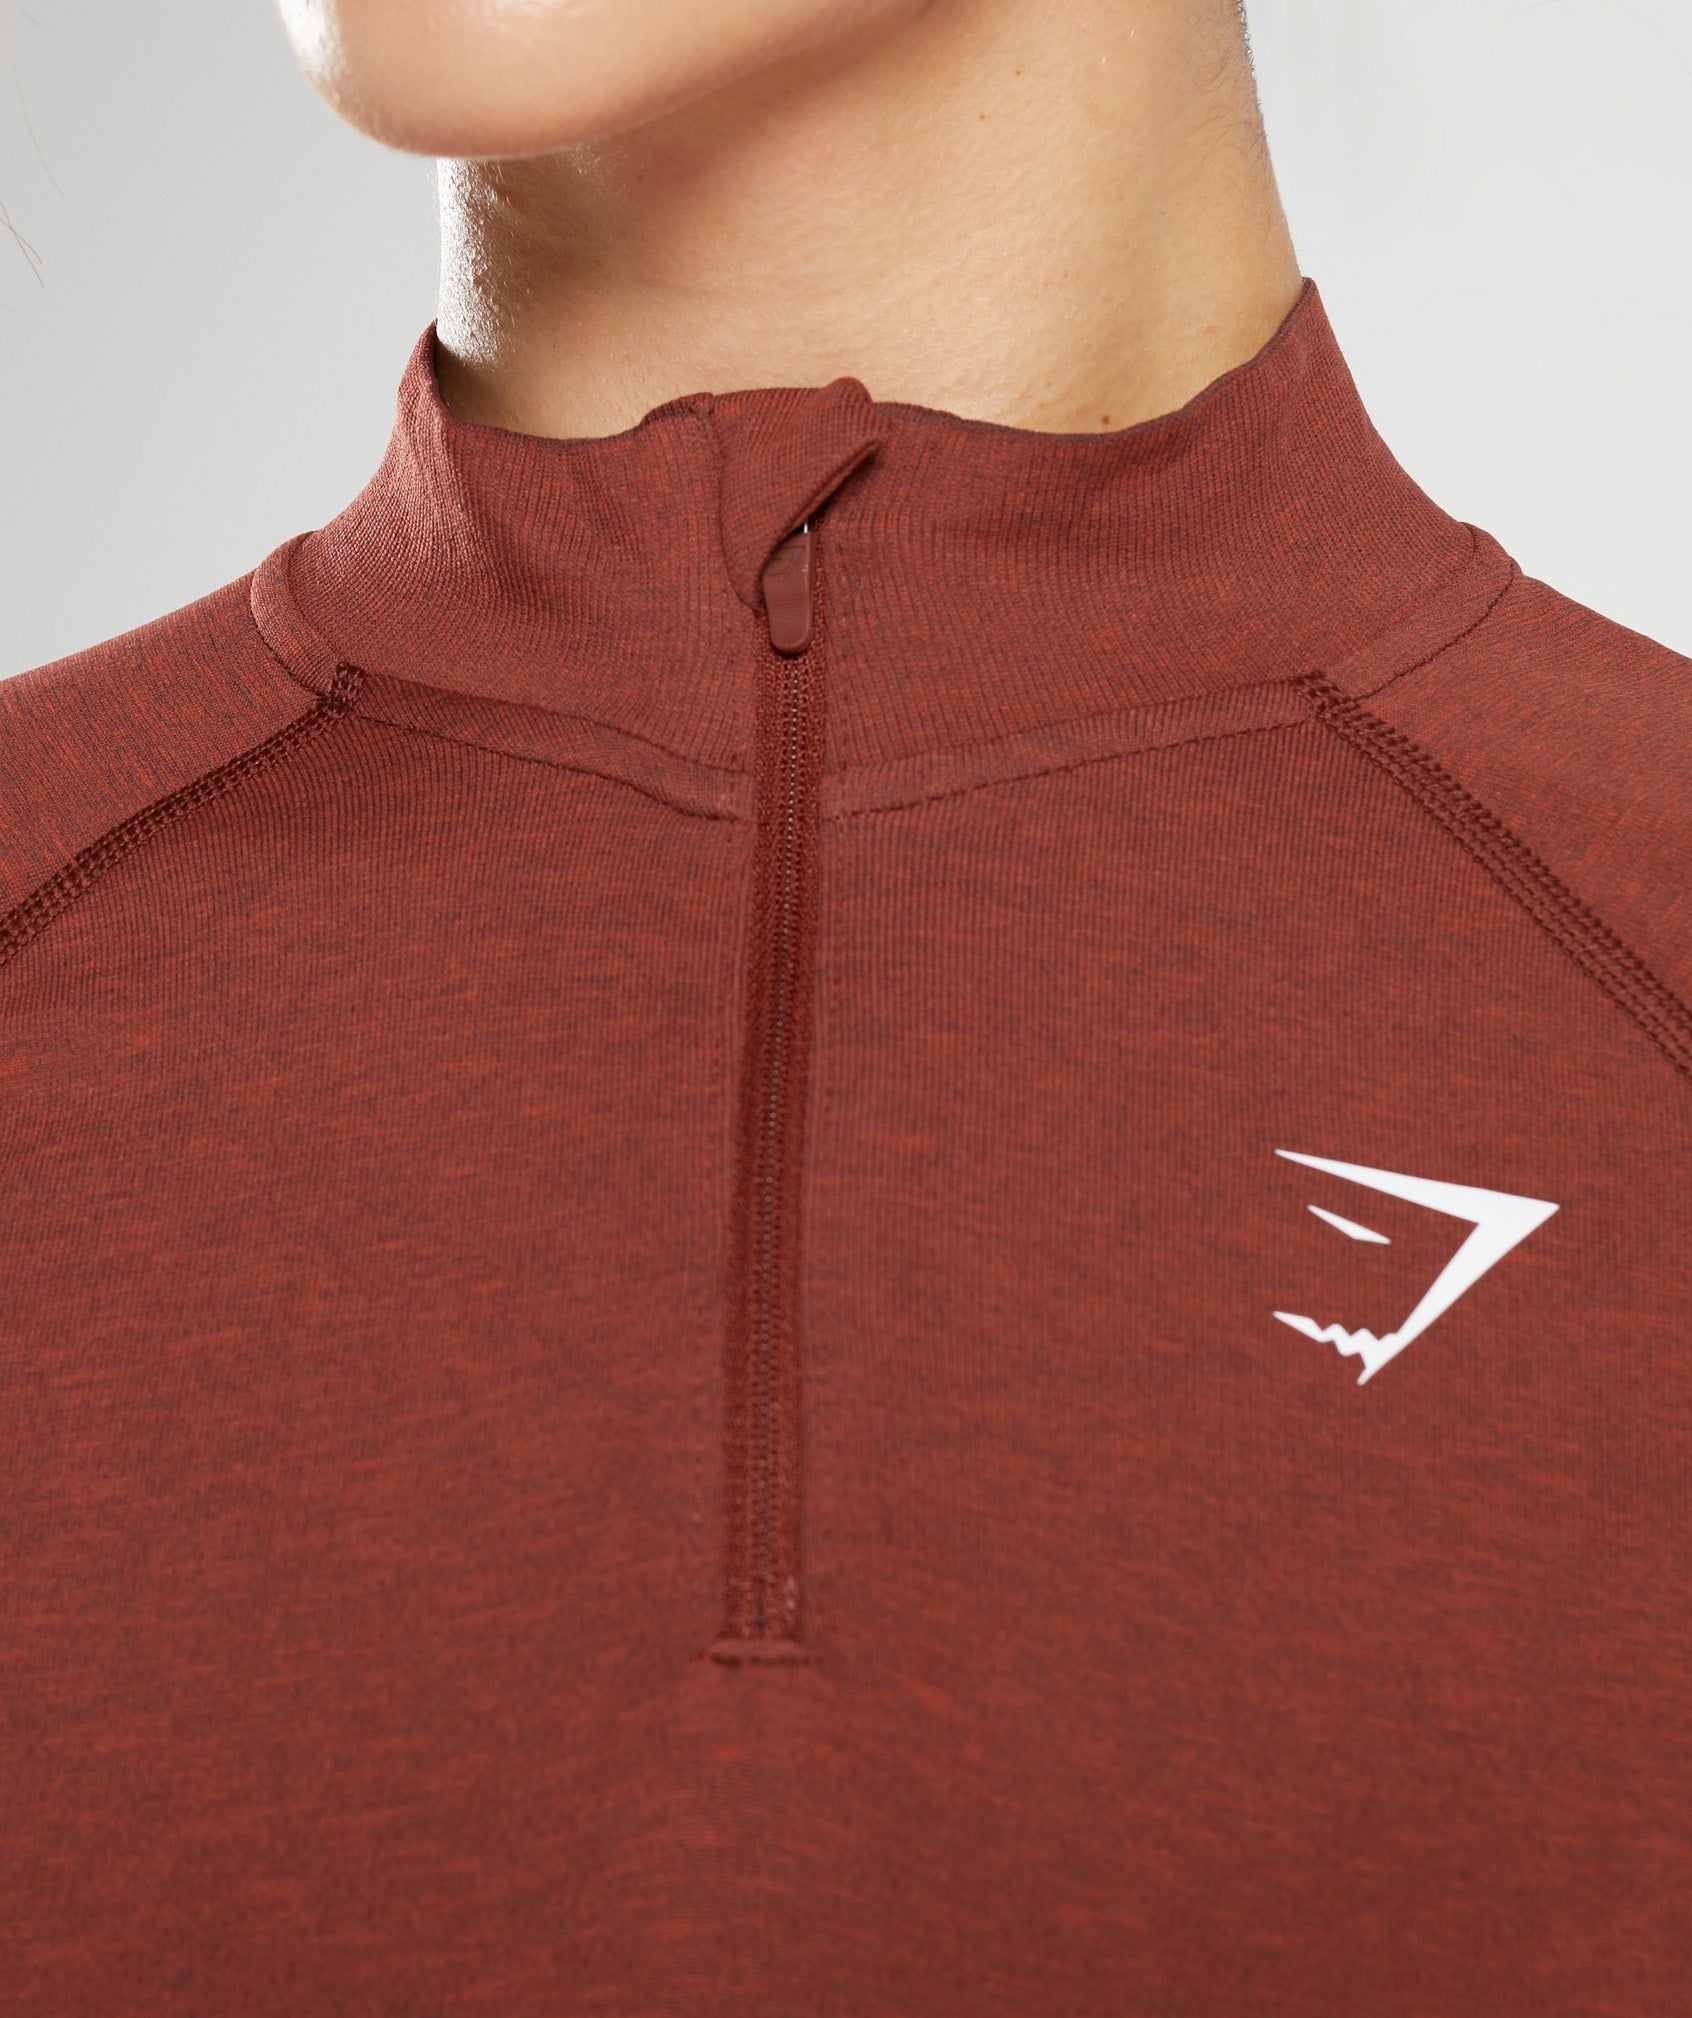 Vital Seamless 2.0 1/4 Track Top in Brick Red Marl - view 3